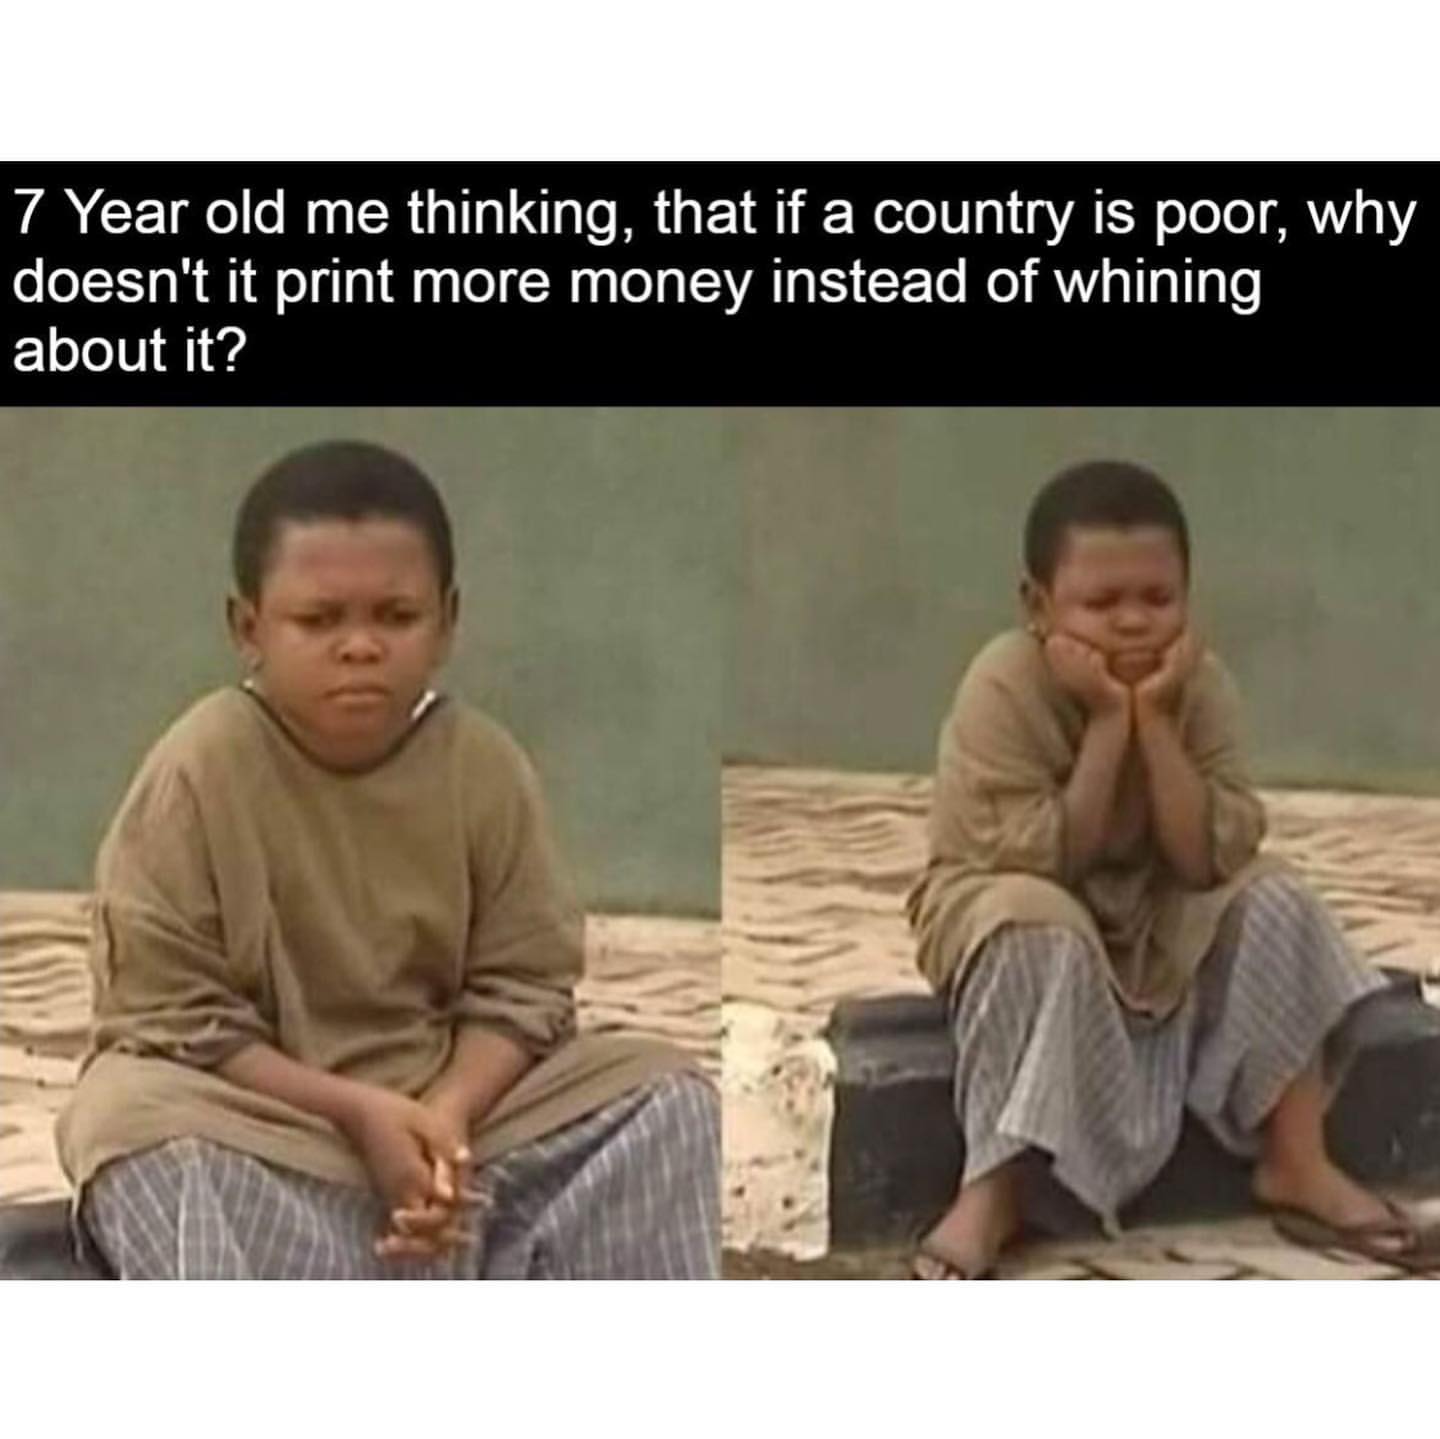 7 Year old me thinking, that if a country is poor, why doesn't it print more money instead of whining about it?